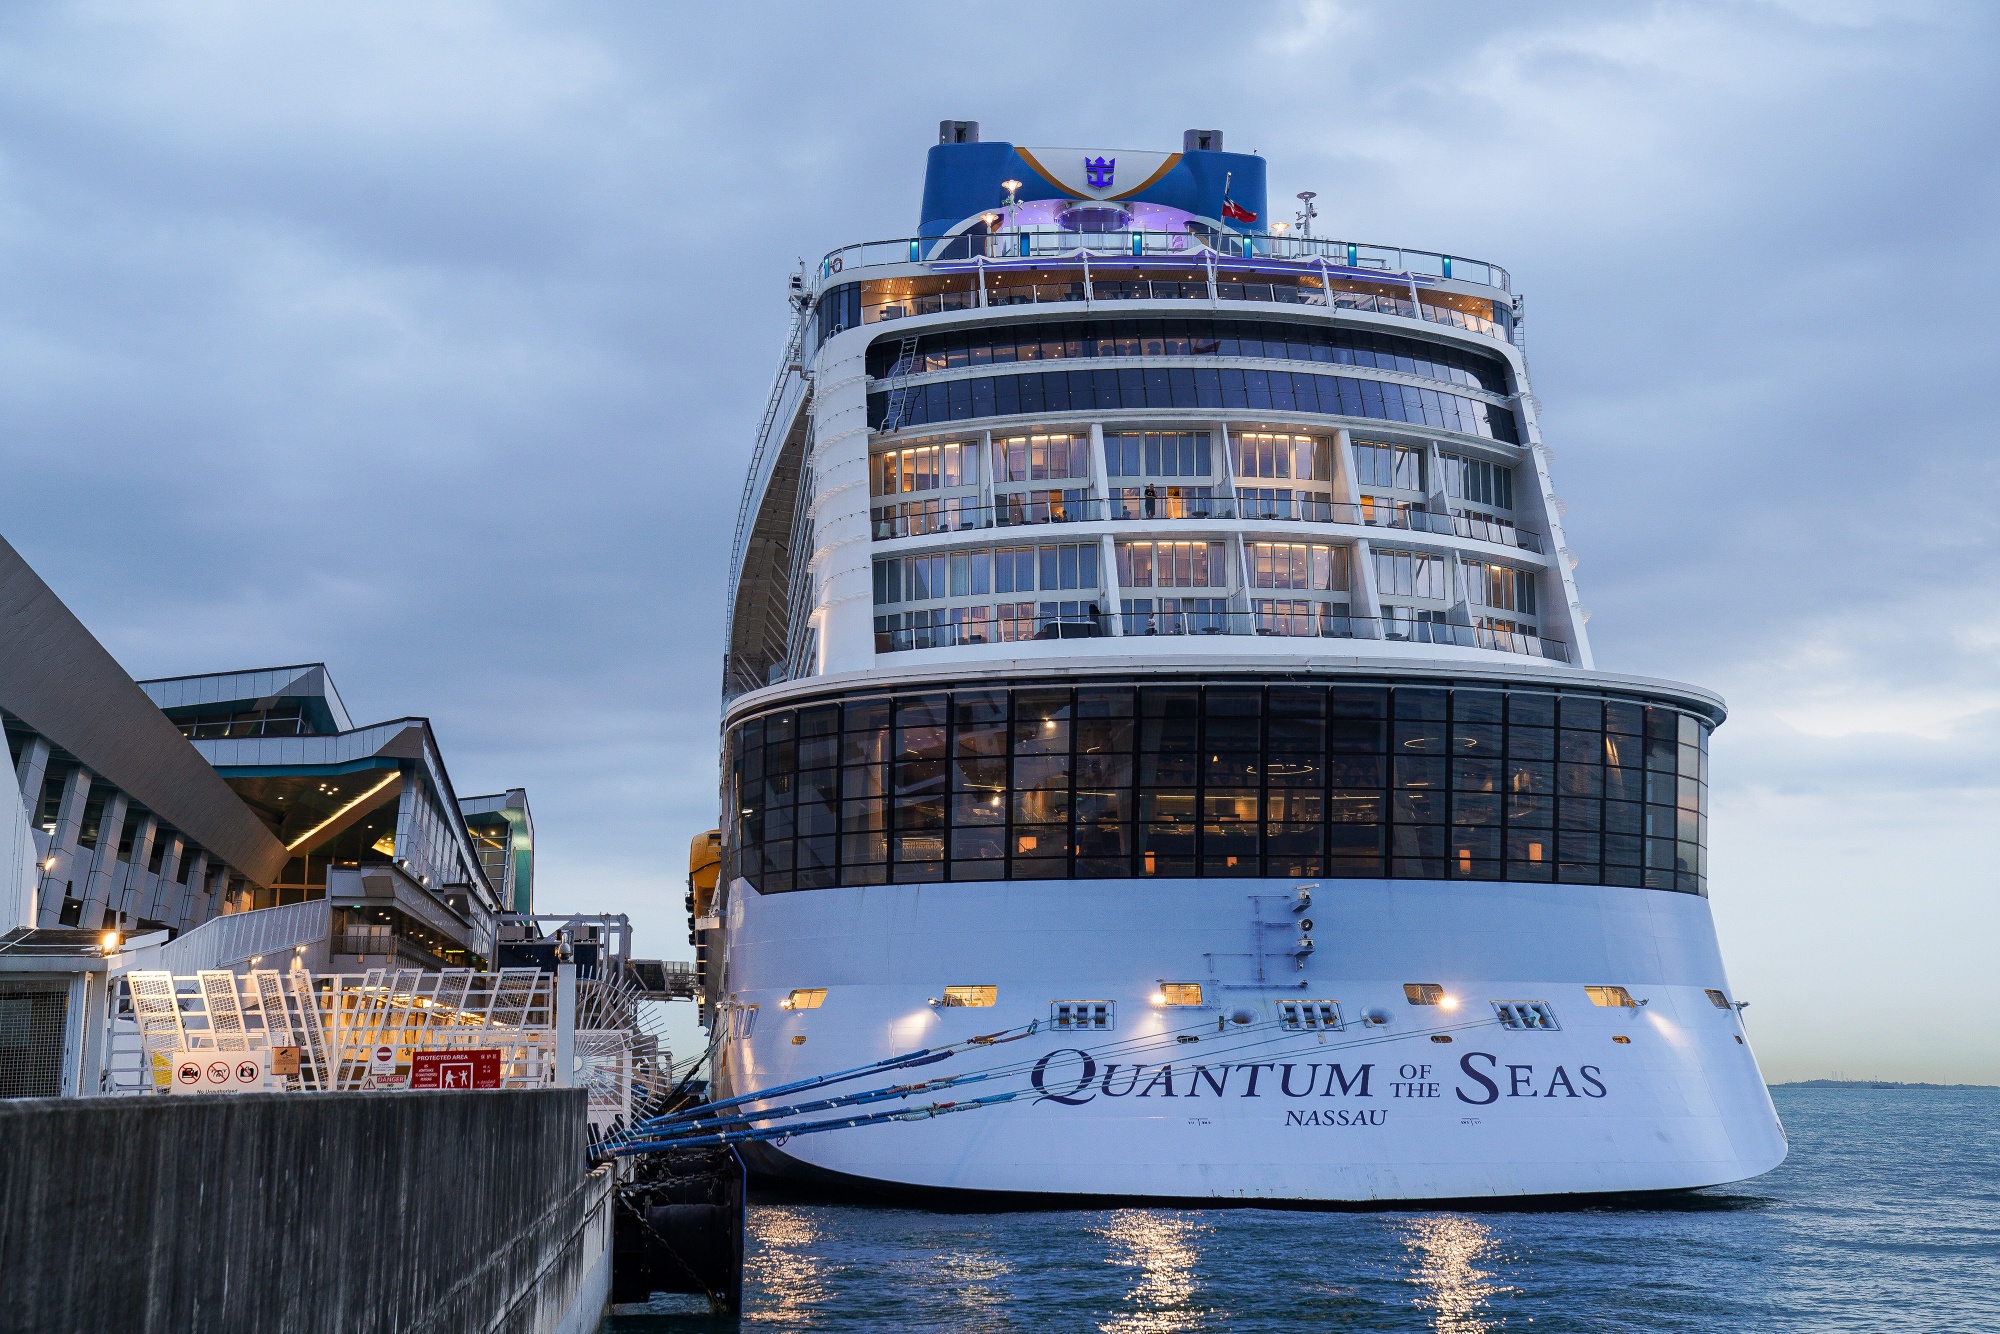 The Quantum of the Seas cruise ship docked at the Marina Bay Cruise Centre in Singapore in December 2020.